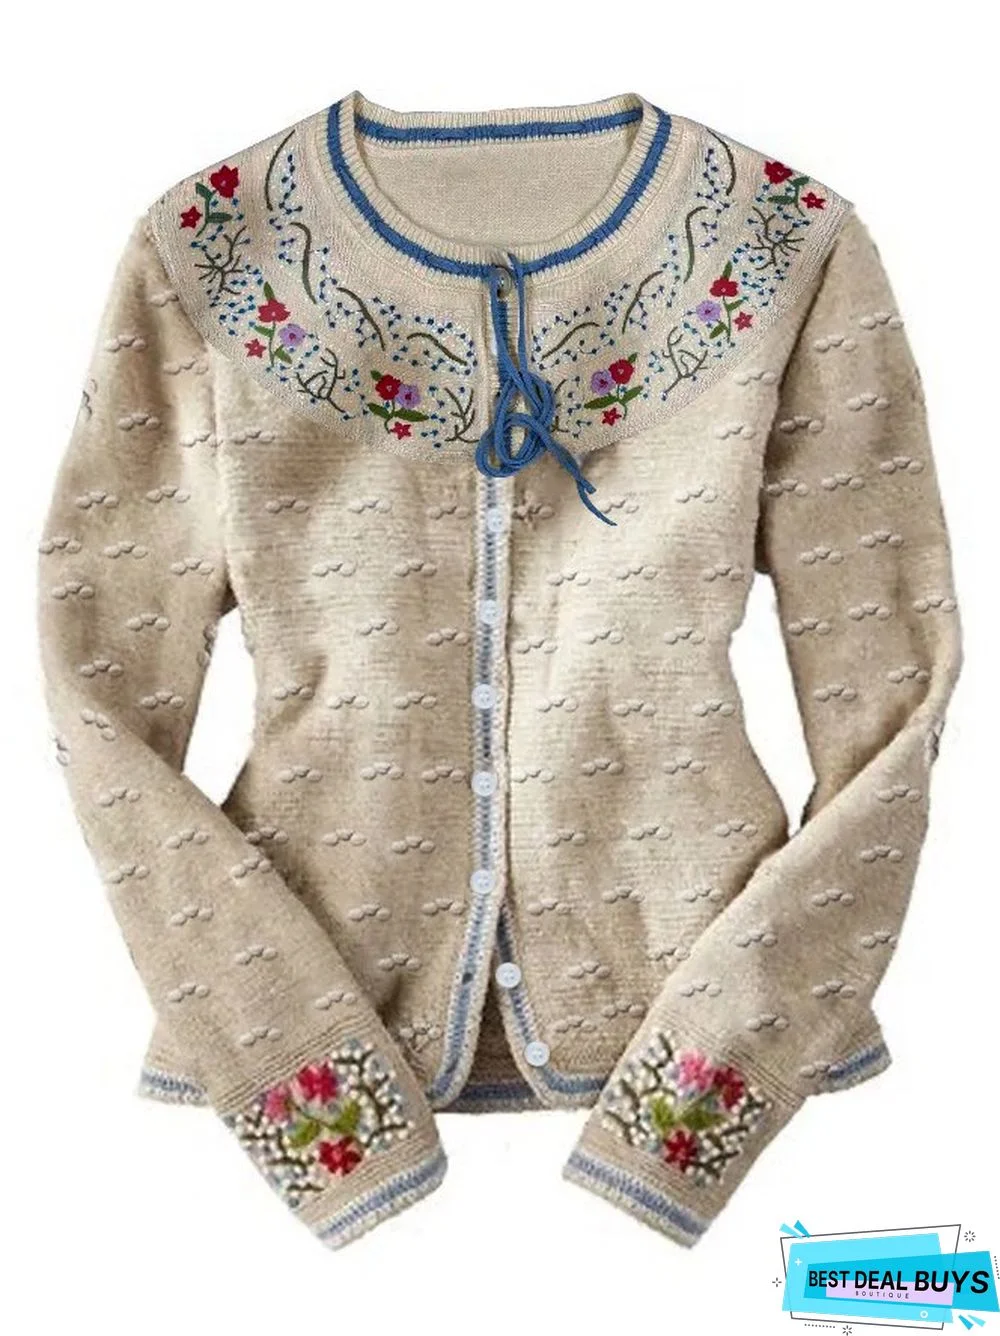 Jacket Bohemian Vintage Embroidery Long Sleeve Cotton-Blend Cardigan Sweater